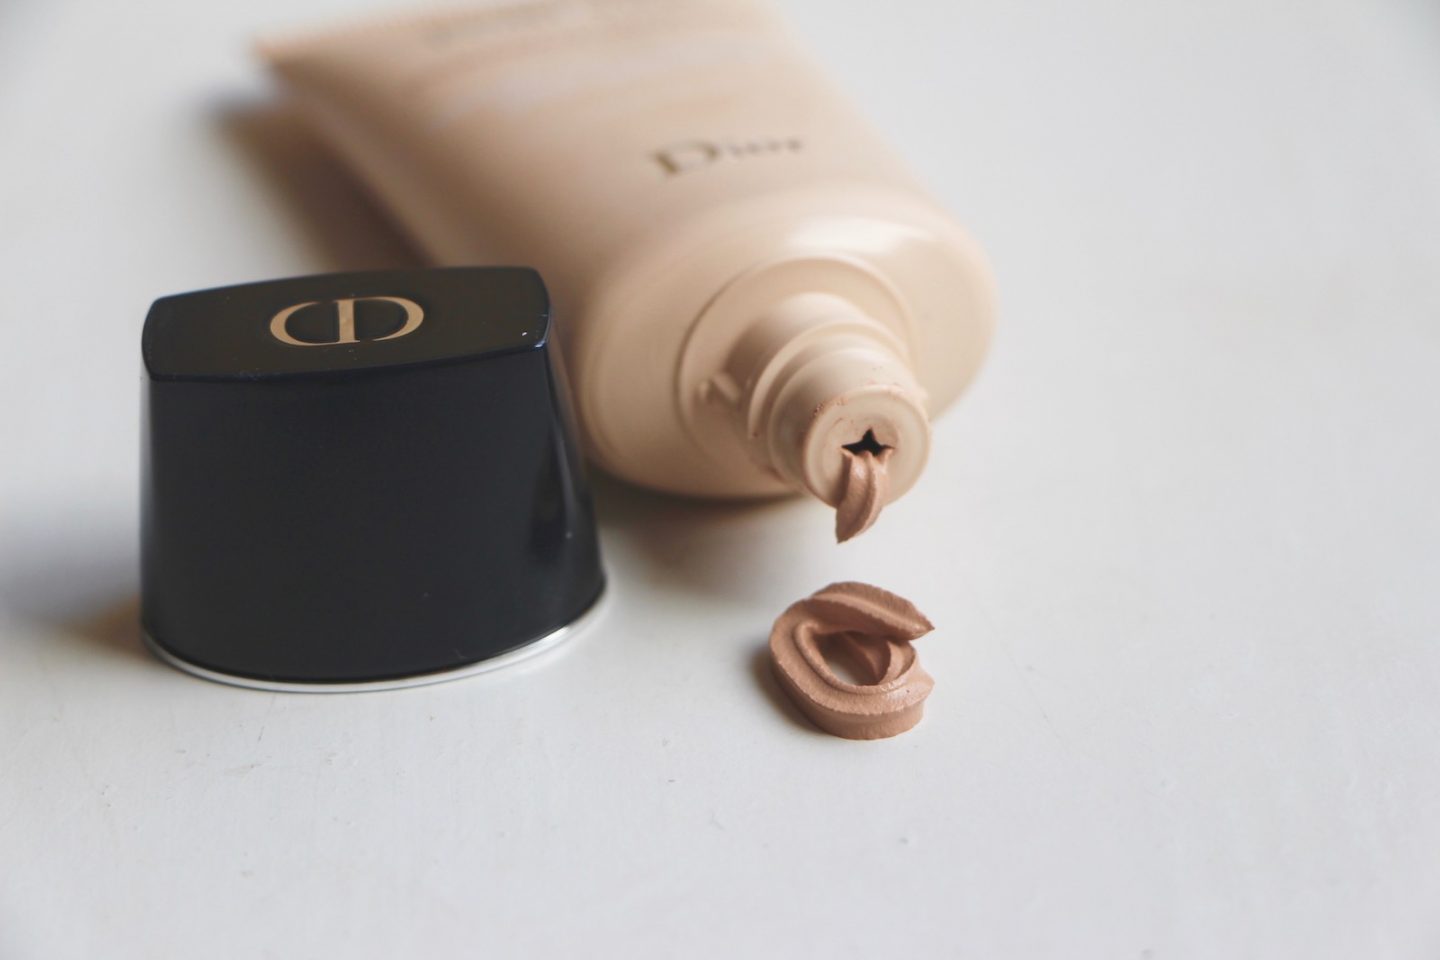 dior perfect mousse foundation